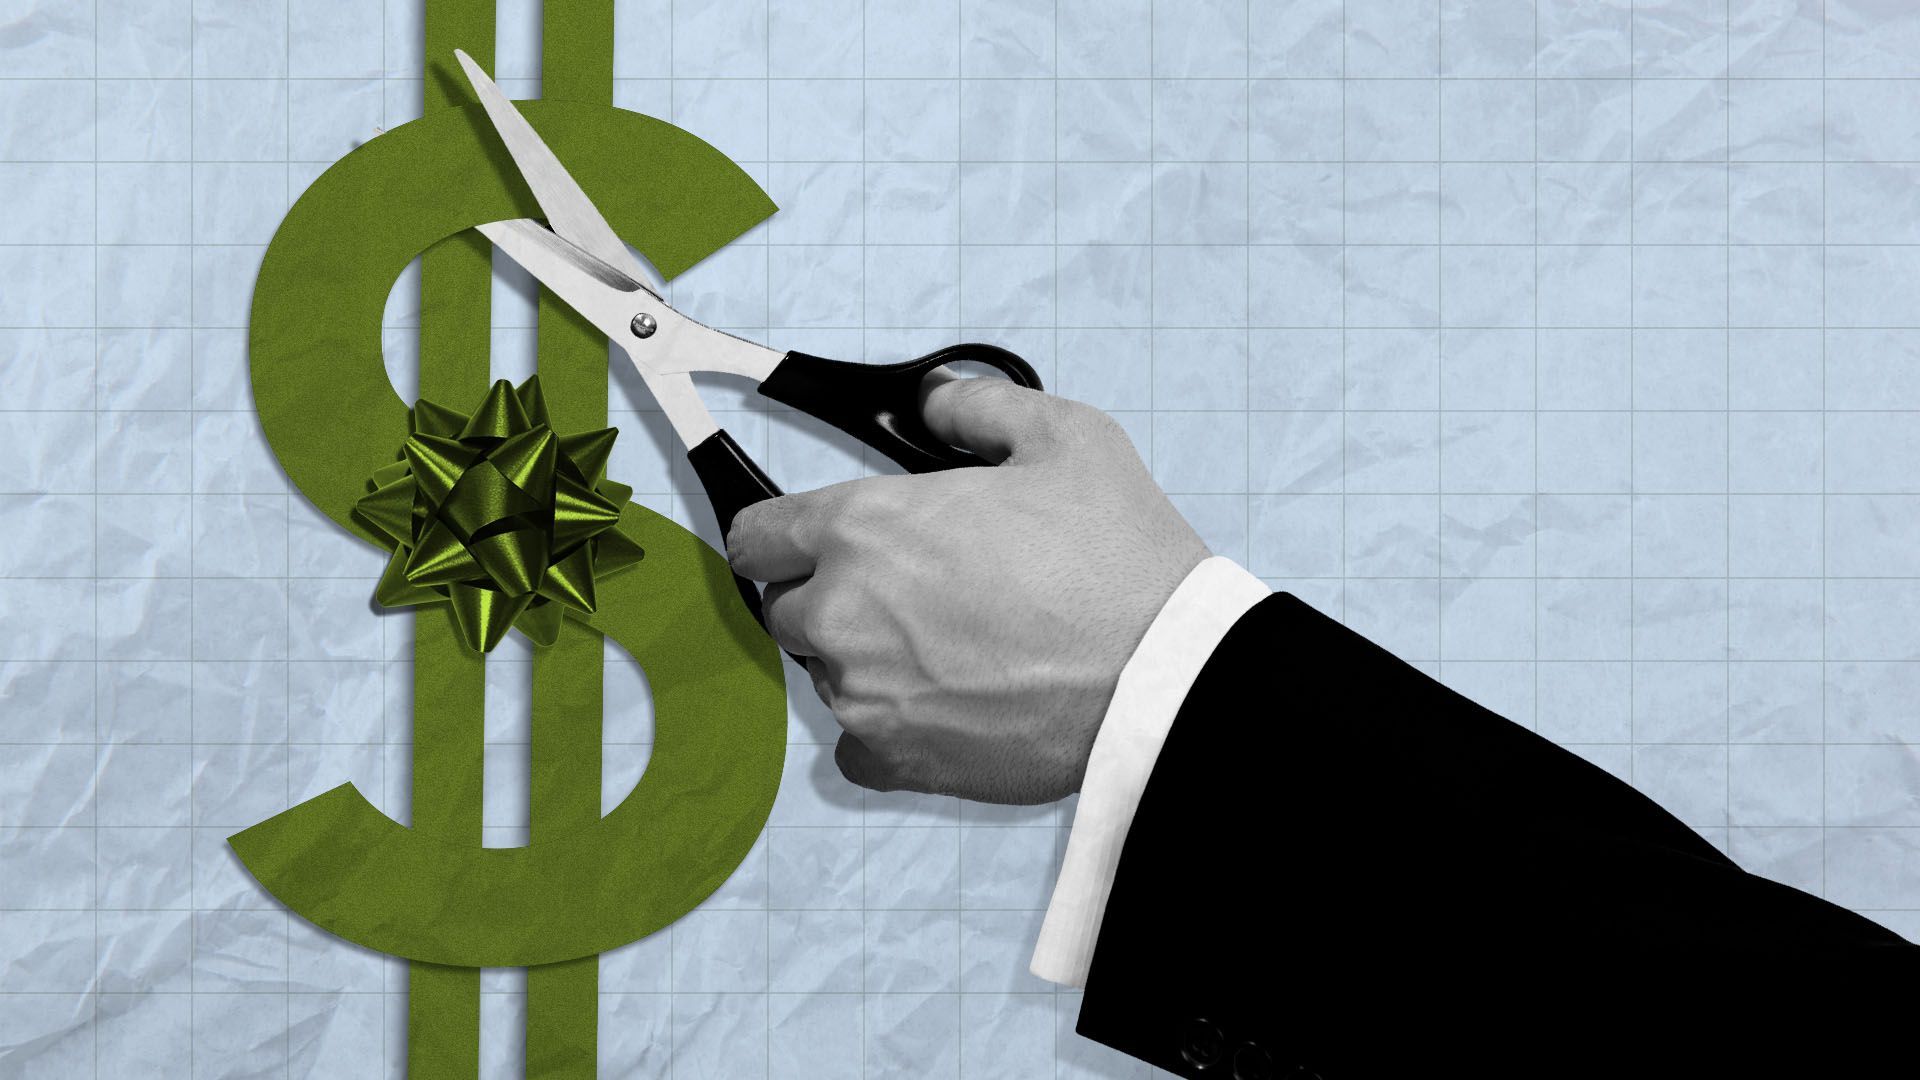 Illustration of a hand with scissors cutting a ribbon in the shape of a dollar sign